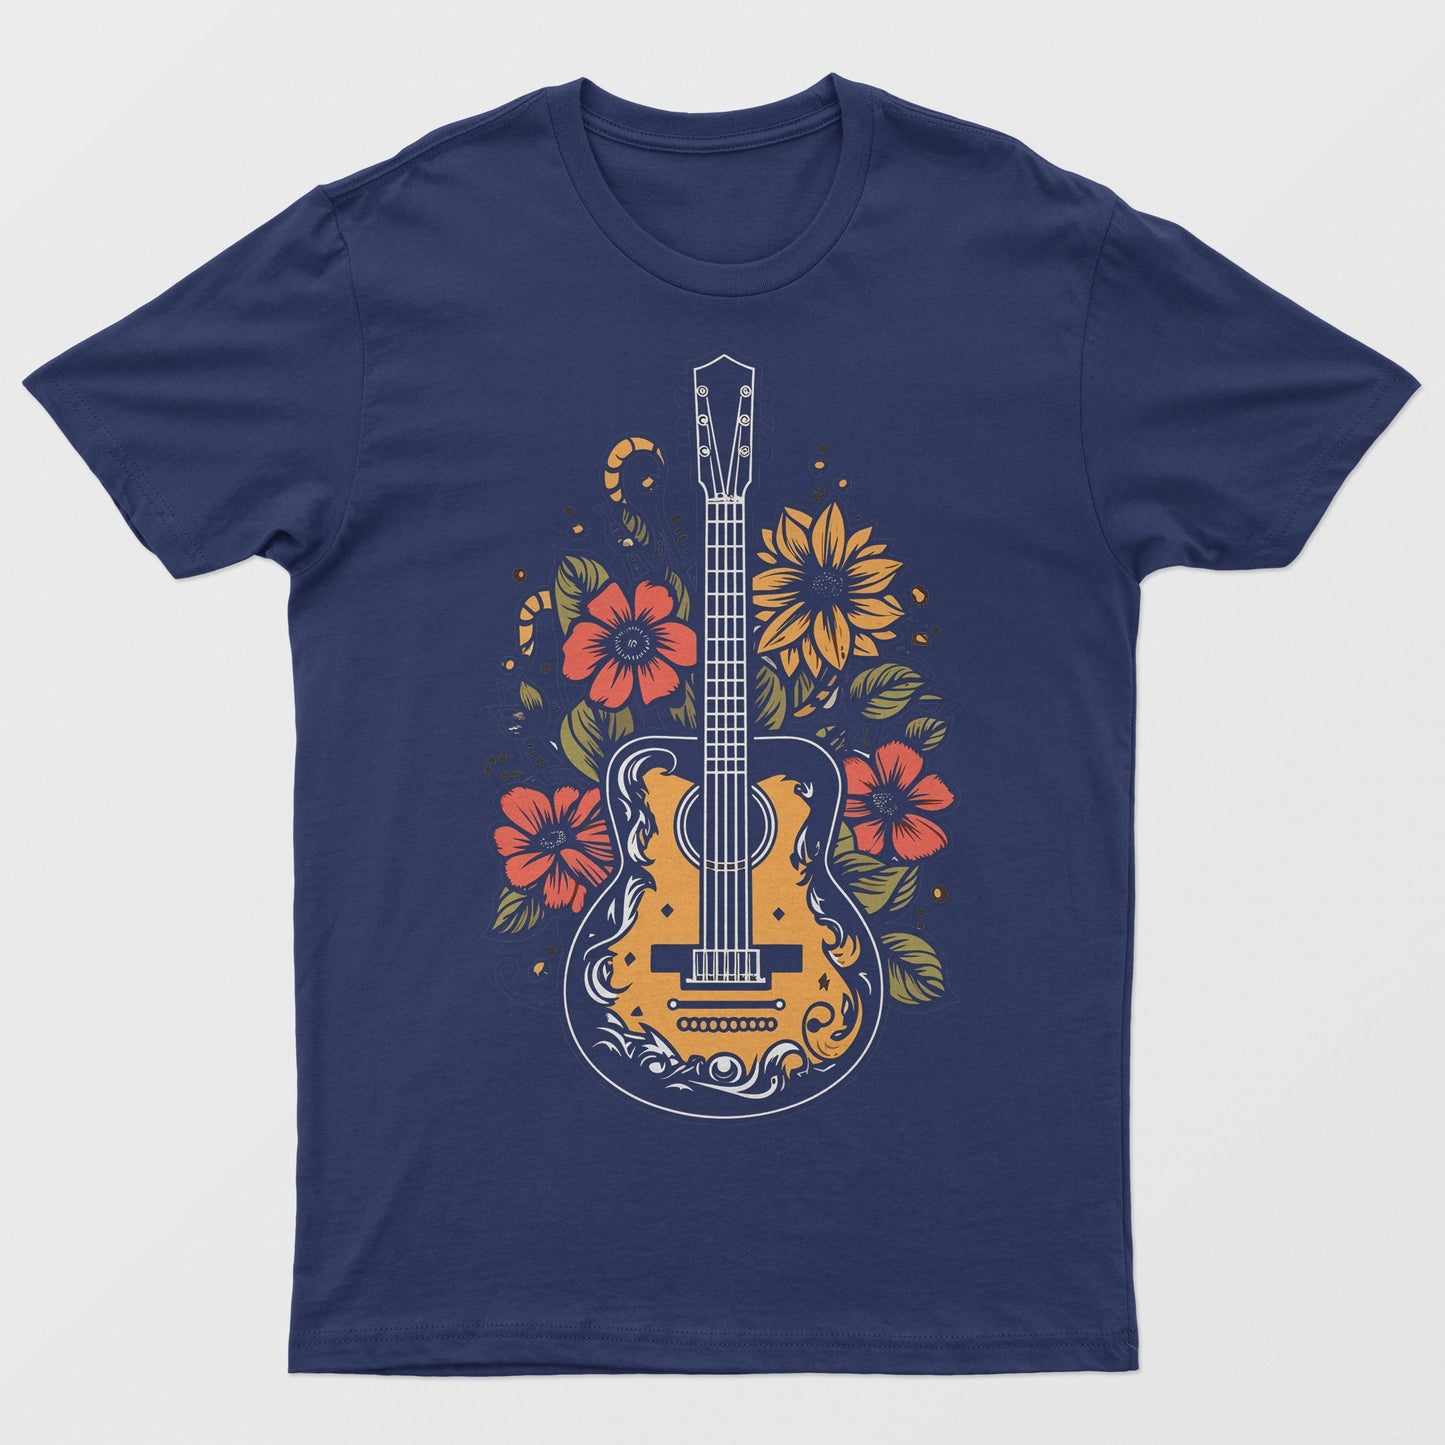 Acoustic Guitar and Flowers Picture, Music Inspired Unisex T-Shirt, Guitar Tee Men's, Women's Tee